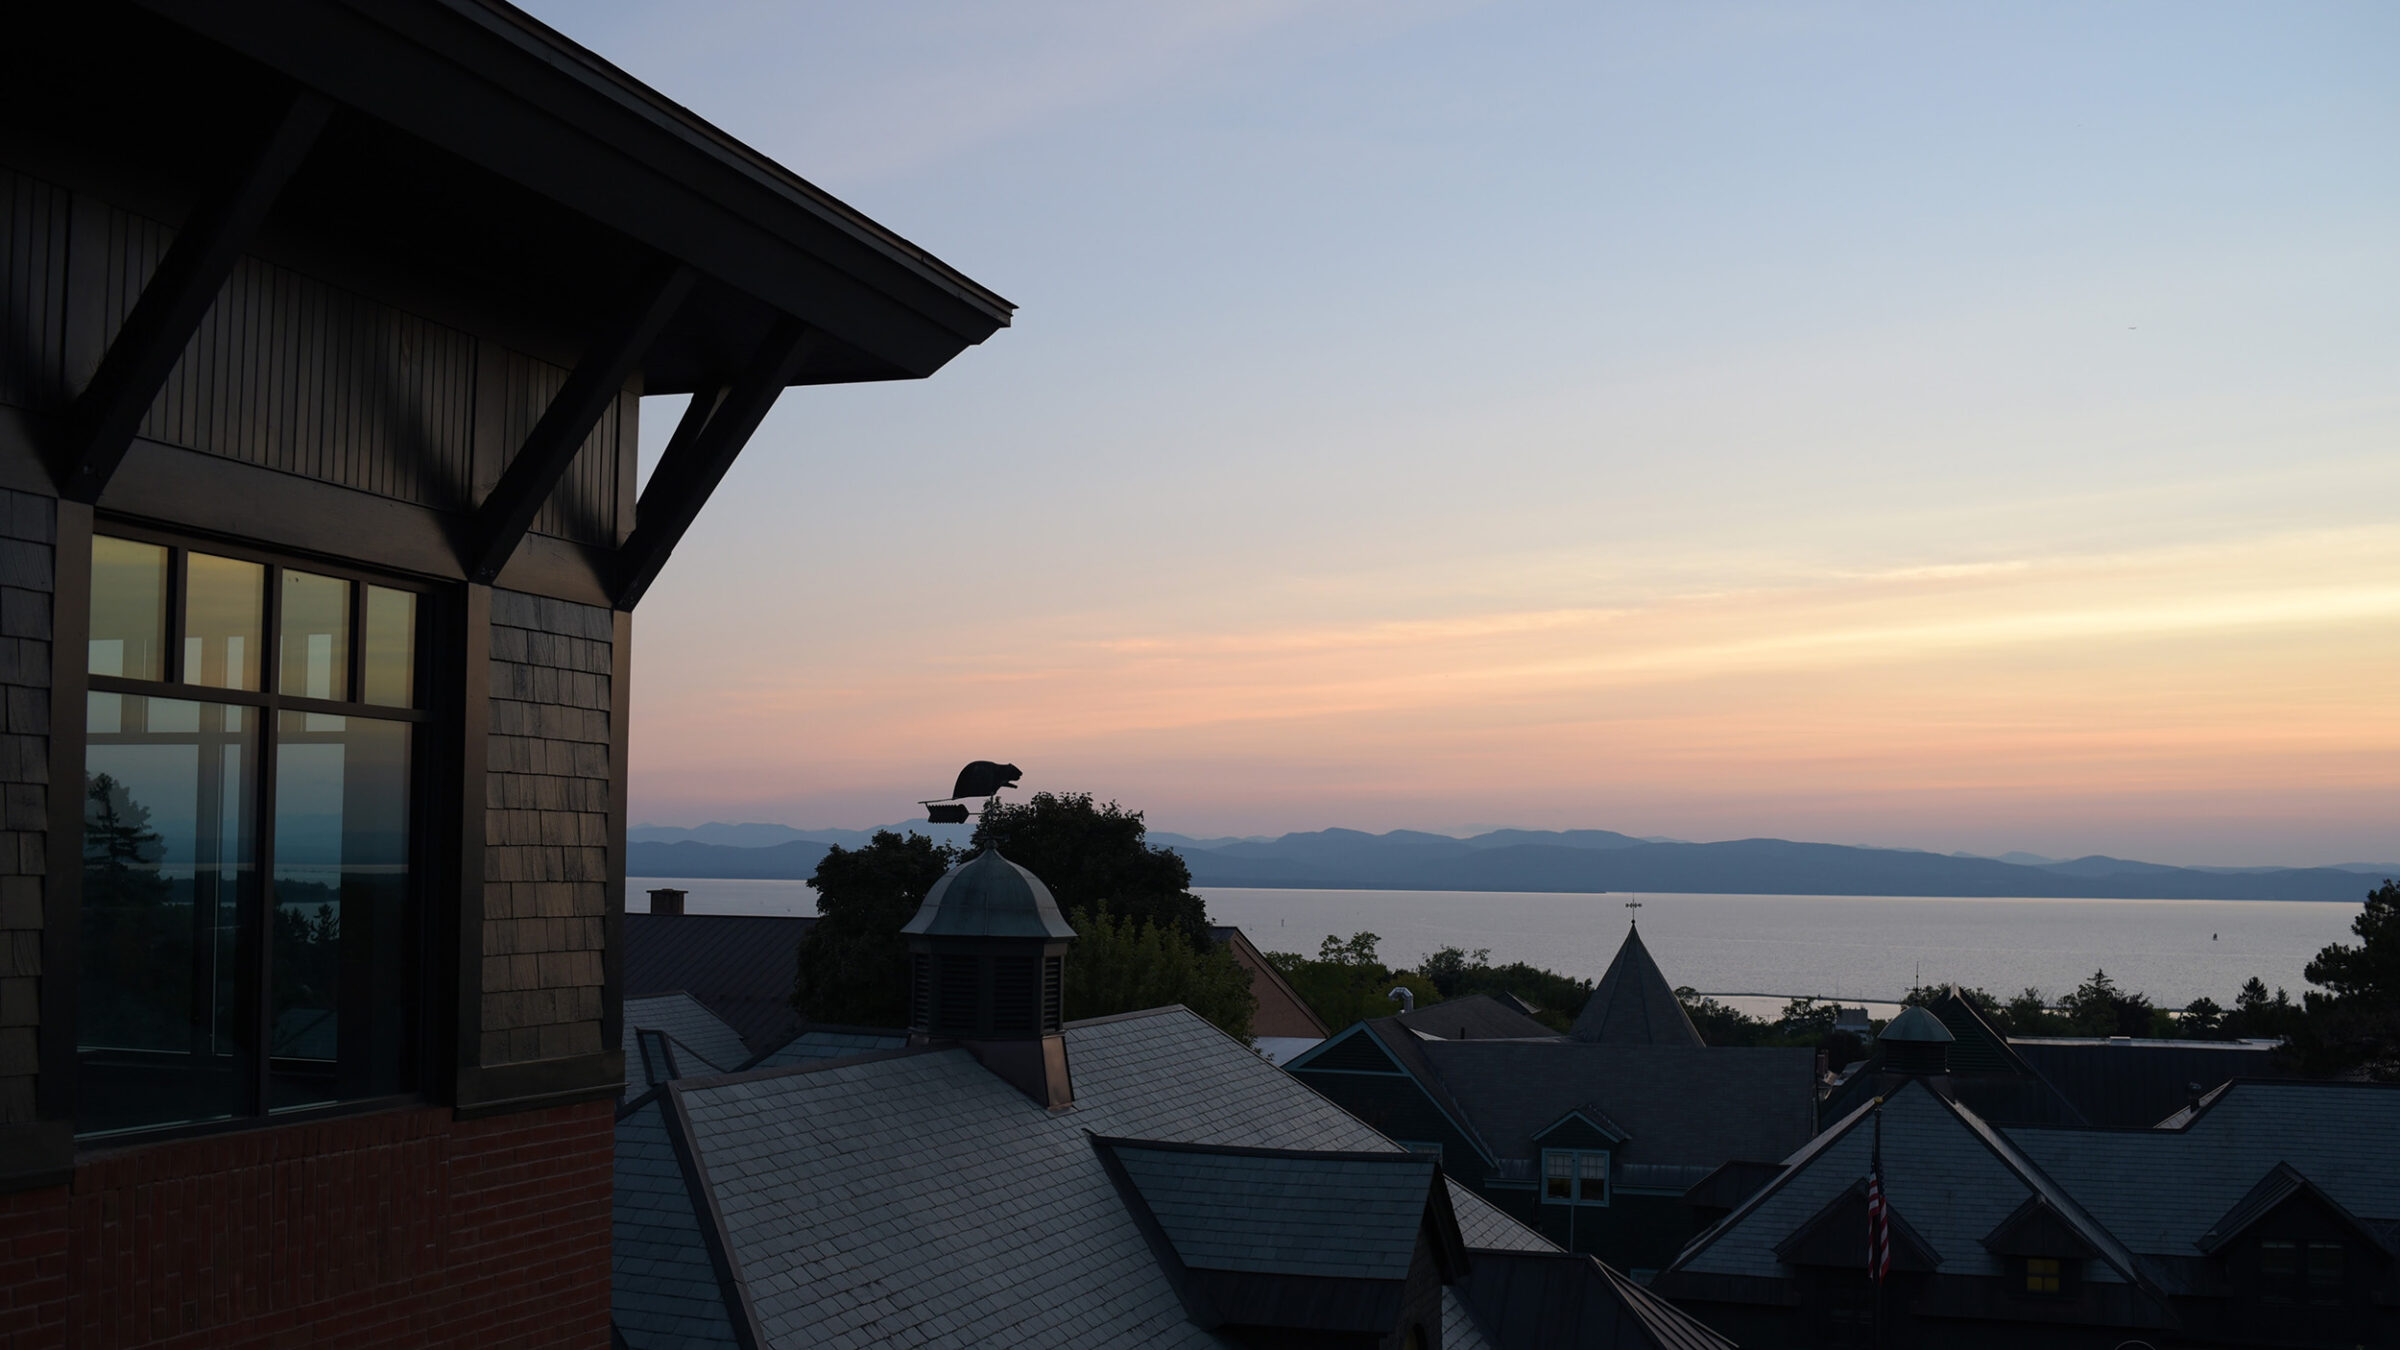 a sunset view of Lake Champlain from the terrace of the library